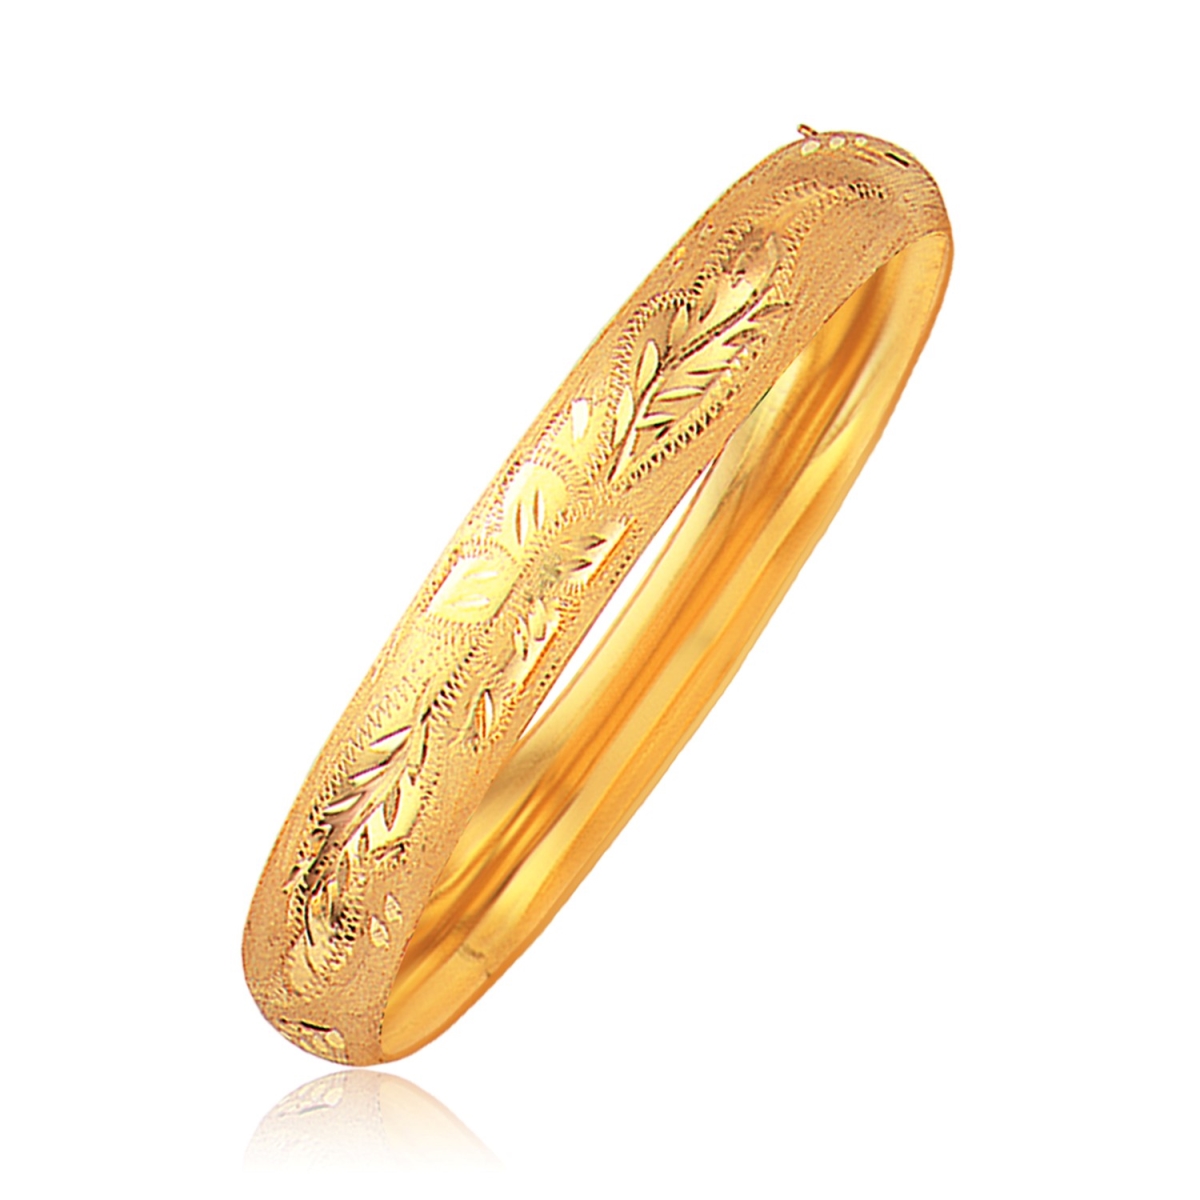 D180478-7 Classic Floral Carved Bangle In 14k Yellow Gold - 10 Mm - Size 7 In.